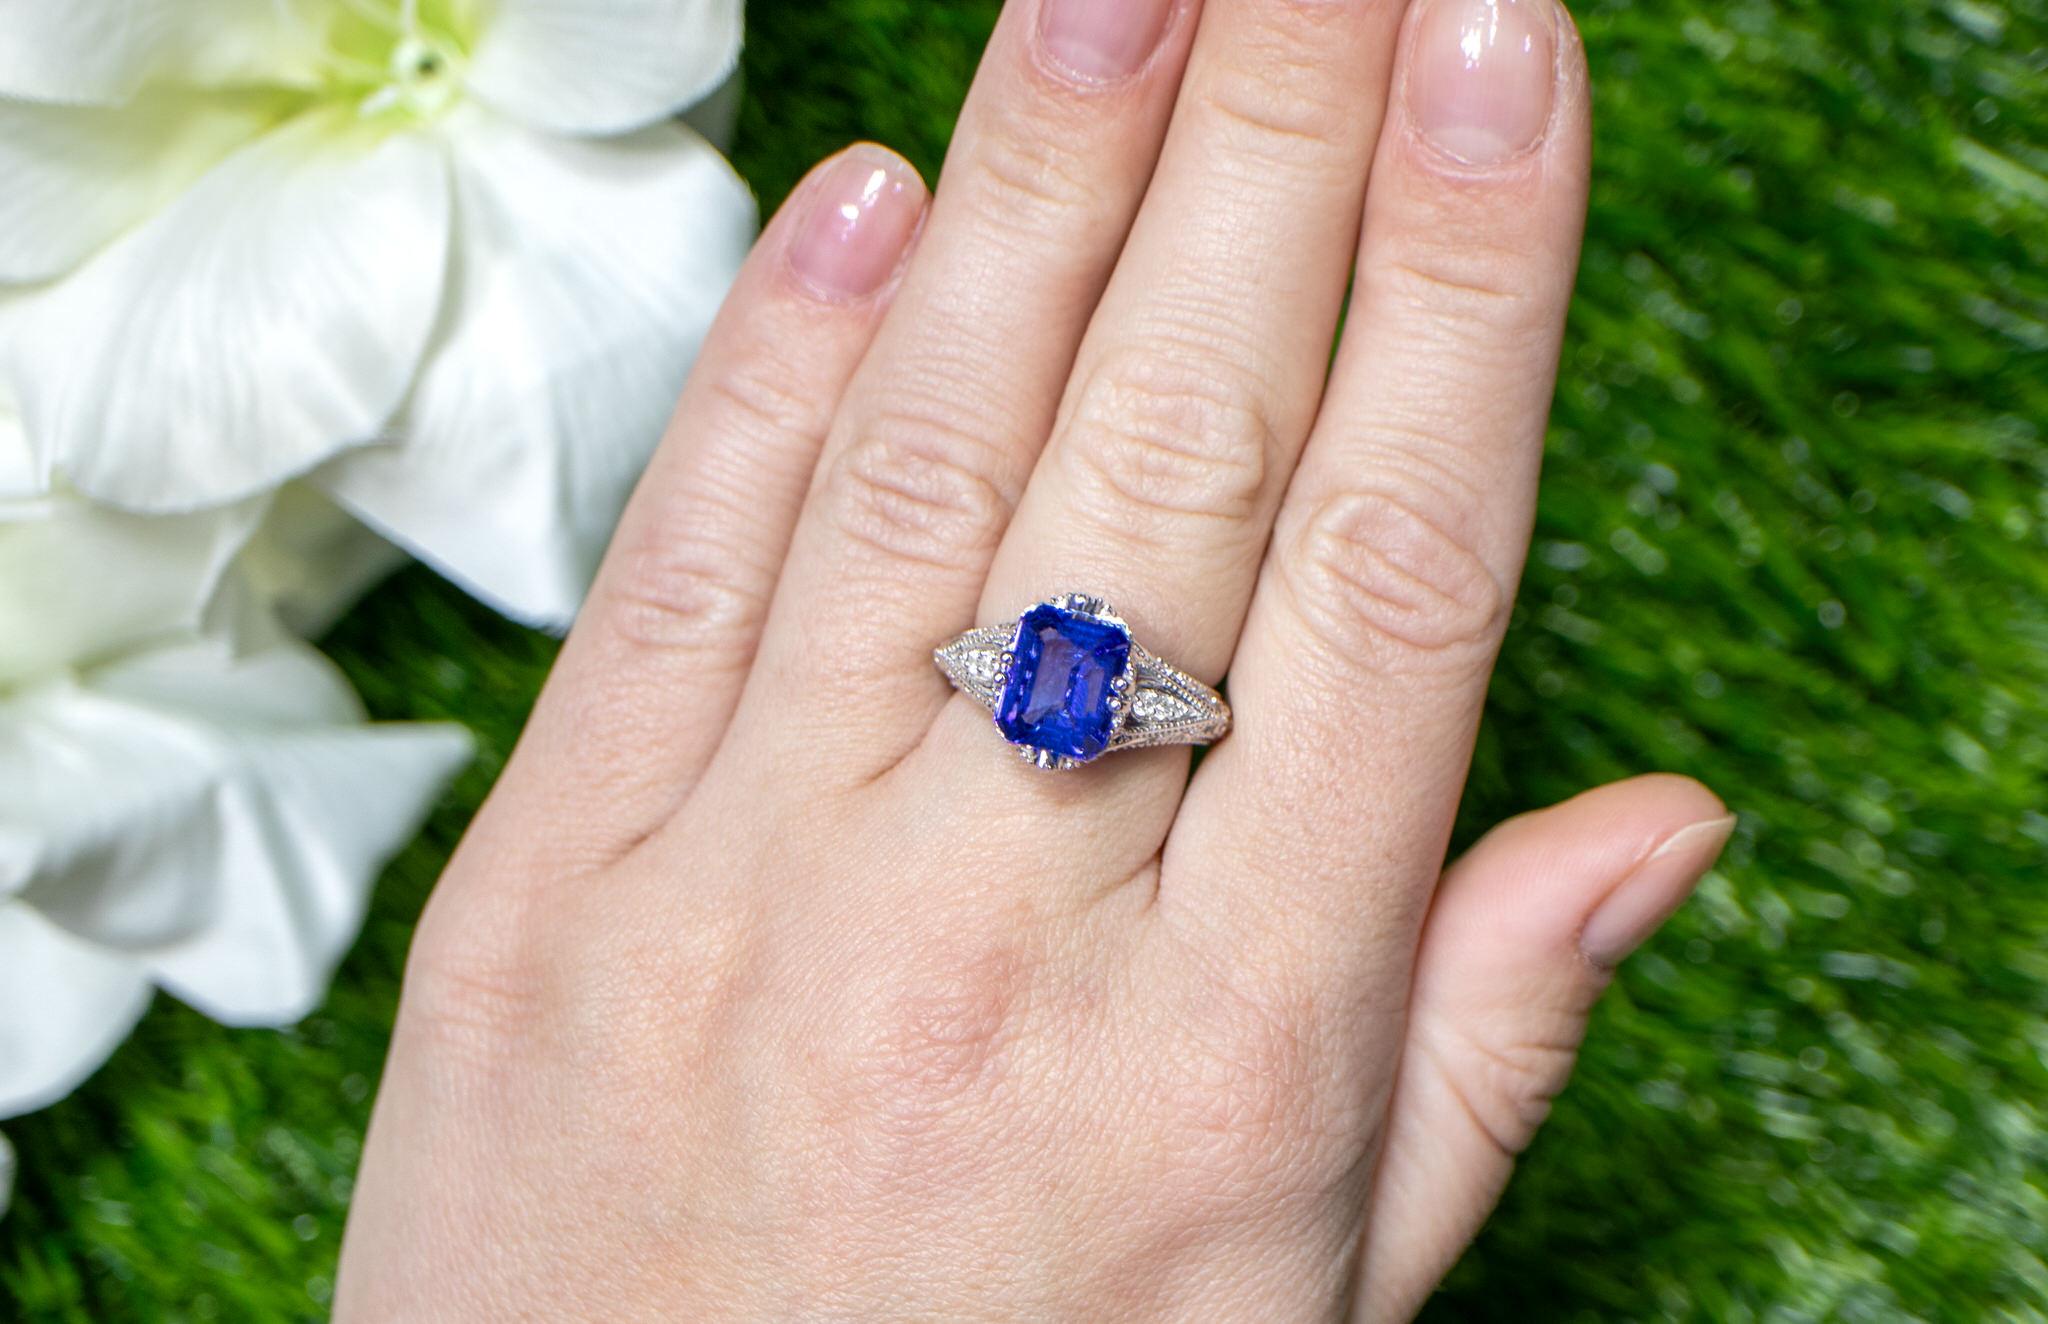 It comes with the Gemological Appraisal by GIA GG/AJP
All Gemstones are Natural
Tanzanite = 2.96 Carats
Diamonds = 0.28 Carats
Metal: 18K White Gold
Ring Size: 6.5* US
*It can be resized complimentary